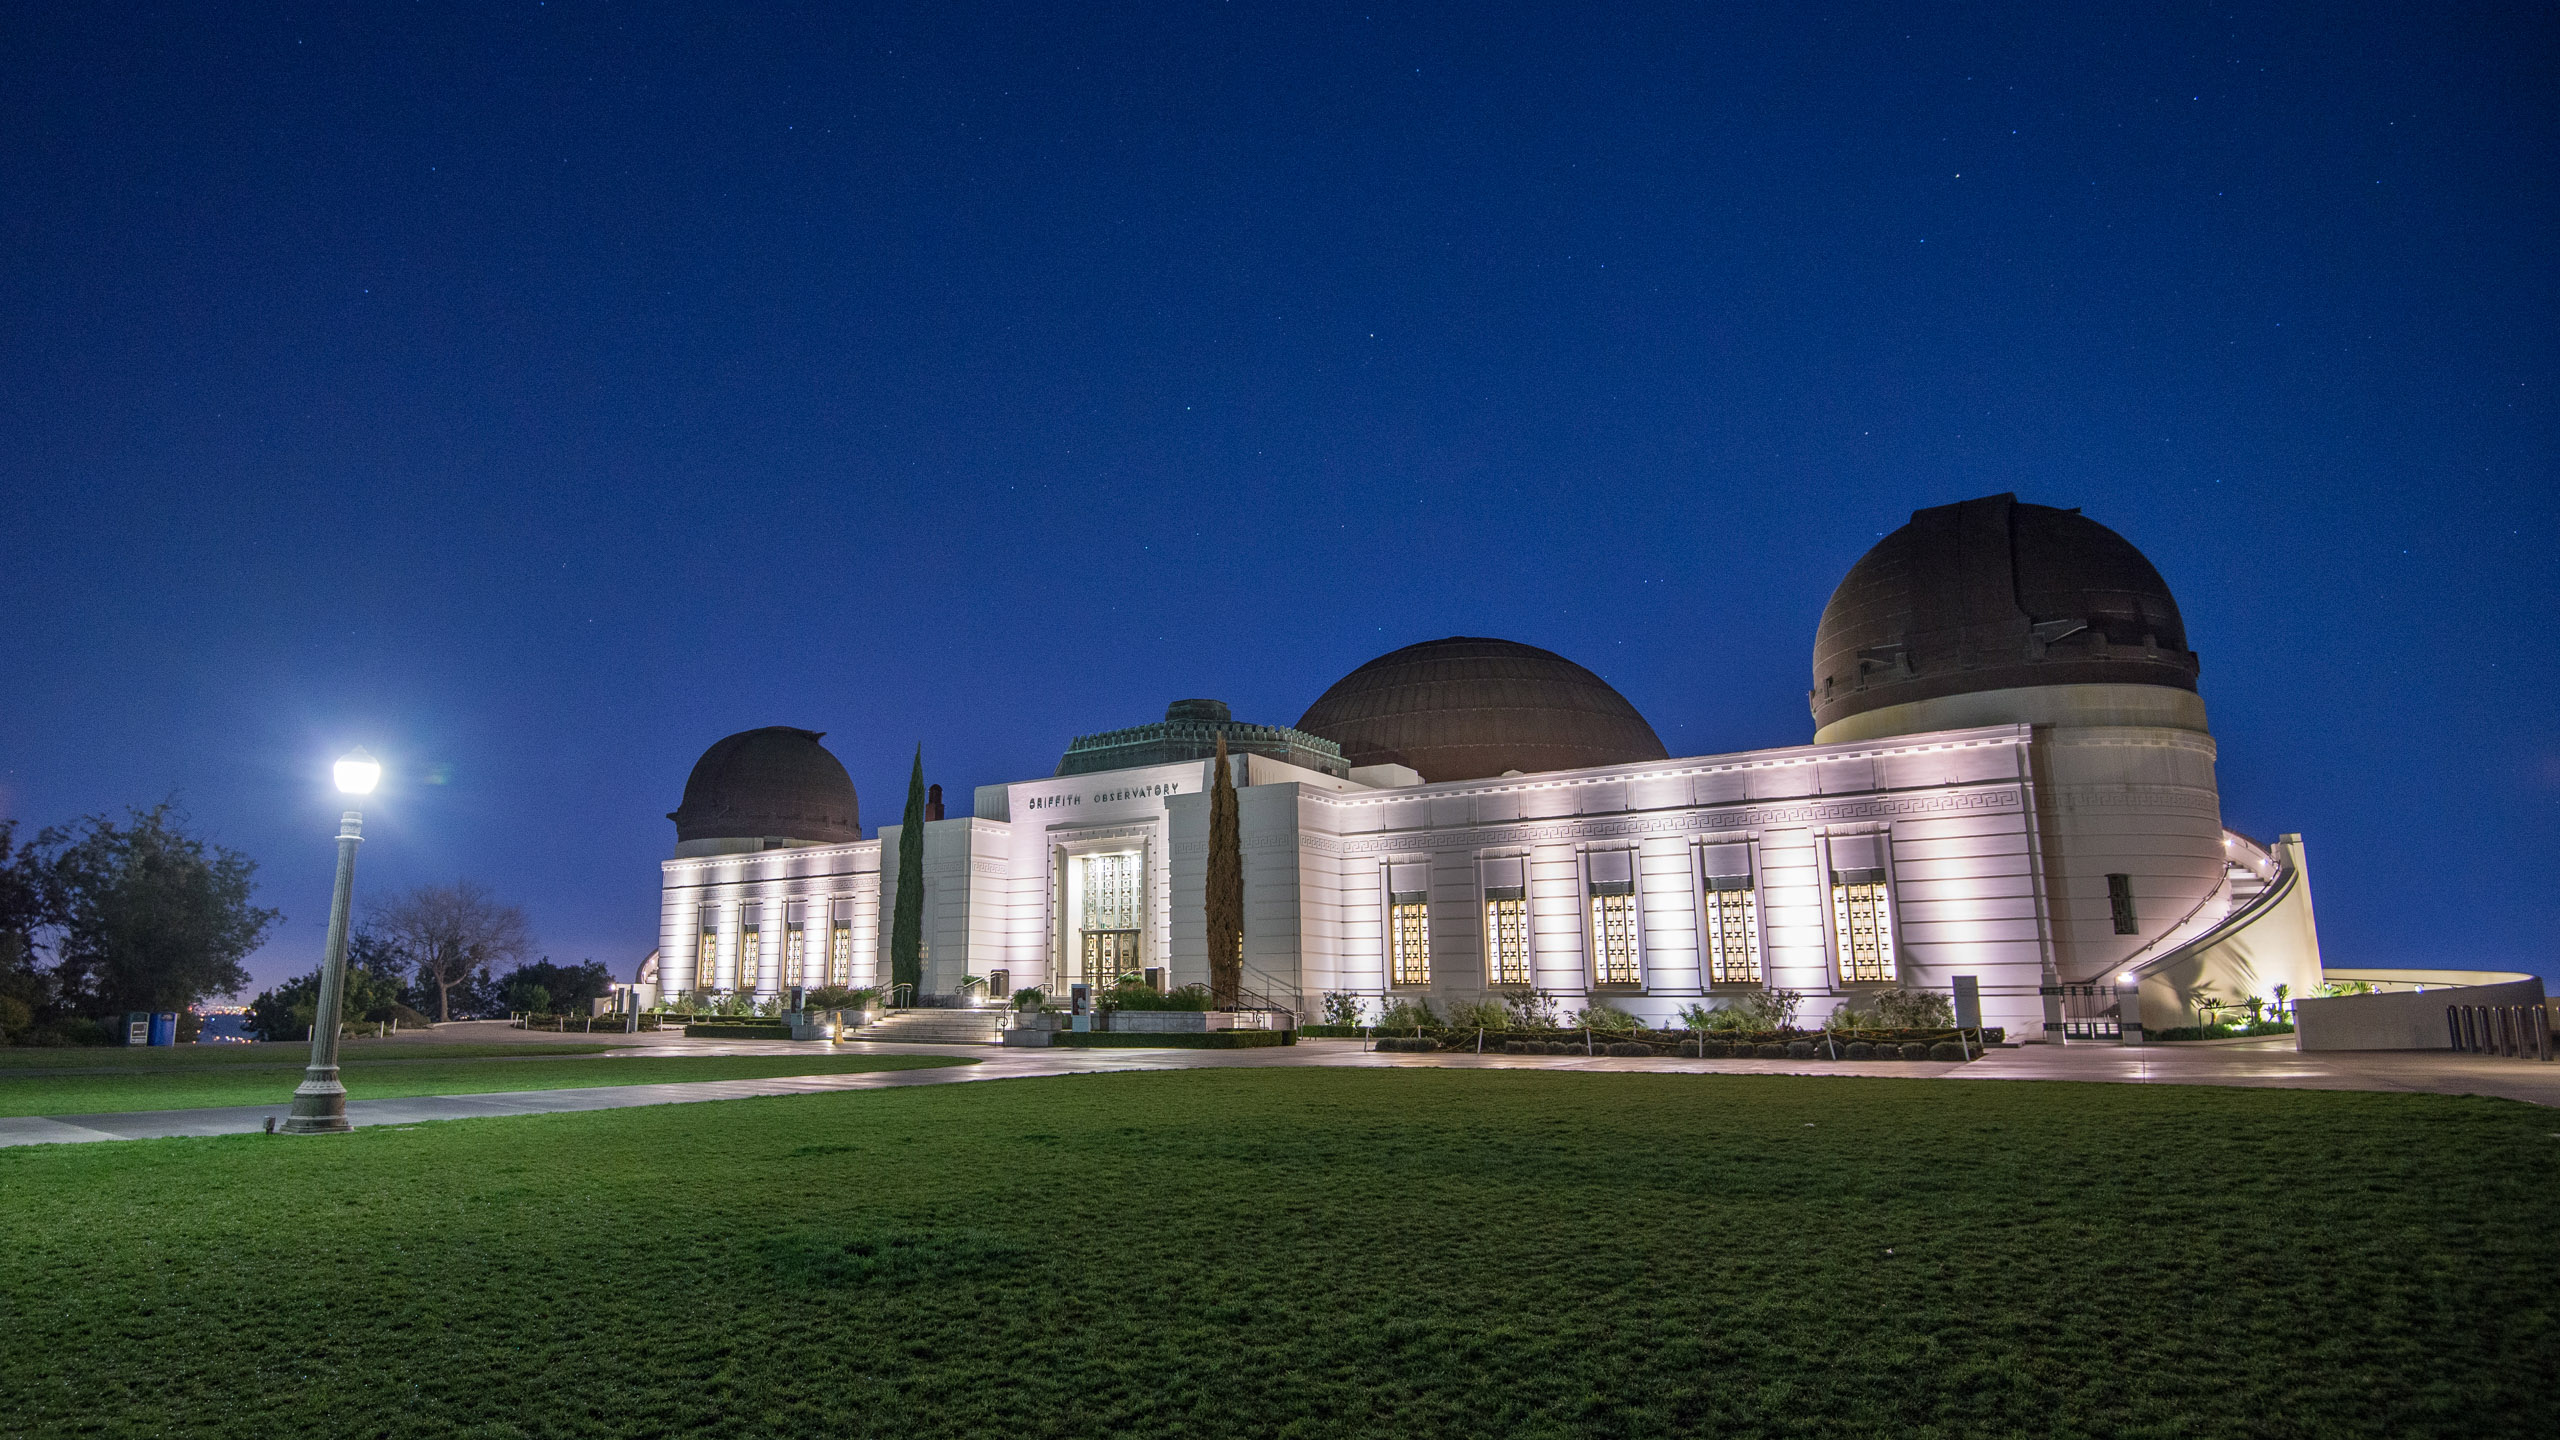 Griffith Observatory by Ezequiel Aizenberg